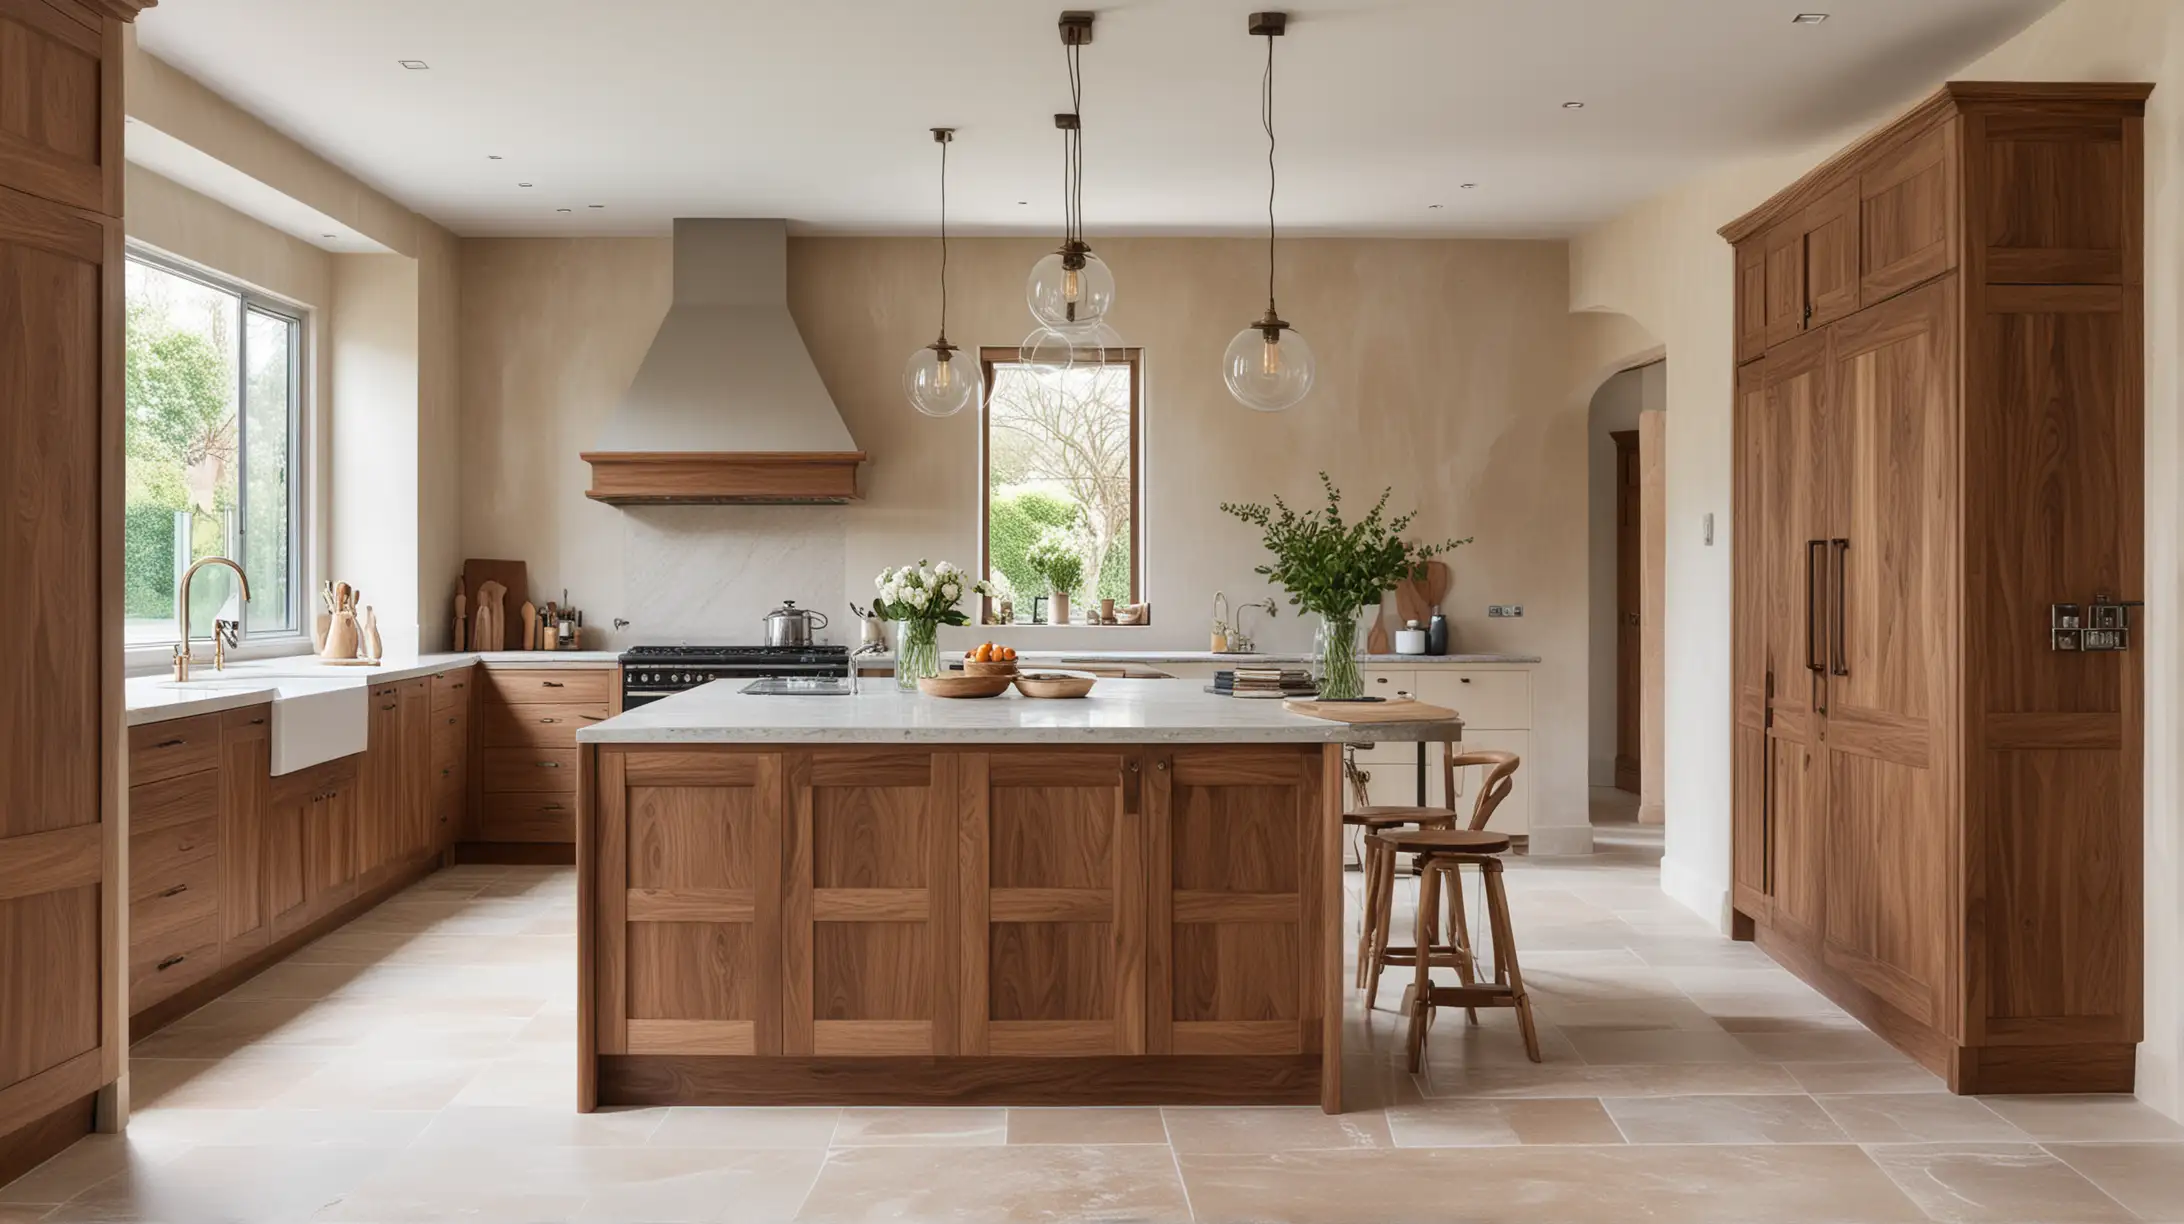 A large modern organic country gallery kitchen with limewashed walls and walnut wood cabinets with a 120cm freestanding cooker and taj mahal quartzite counters
